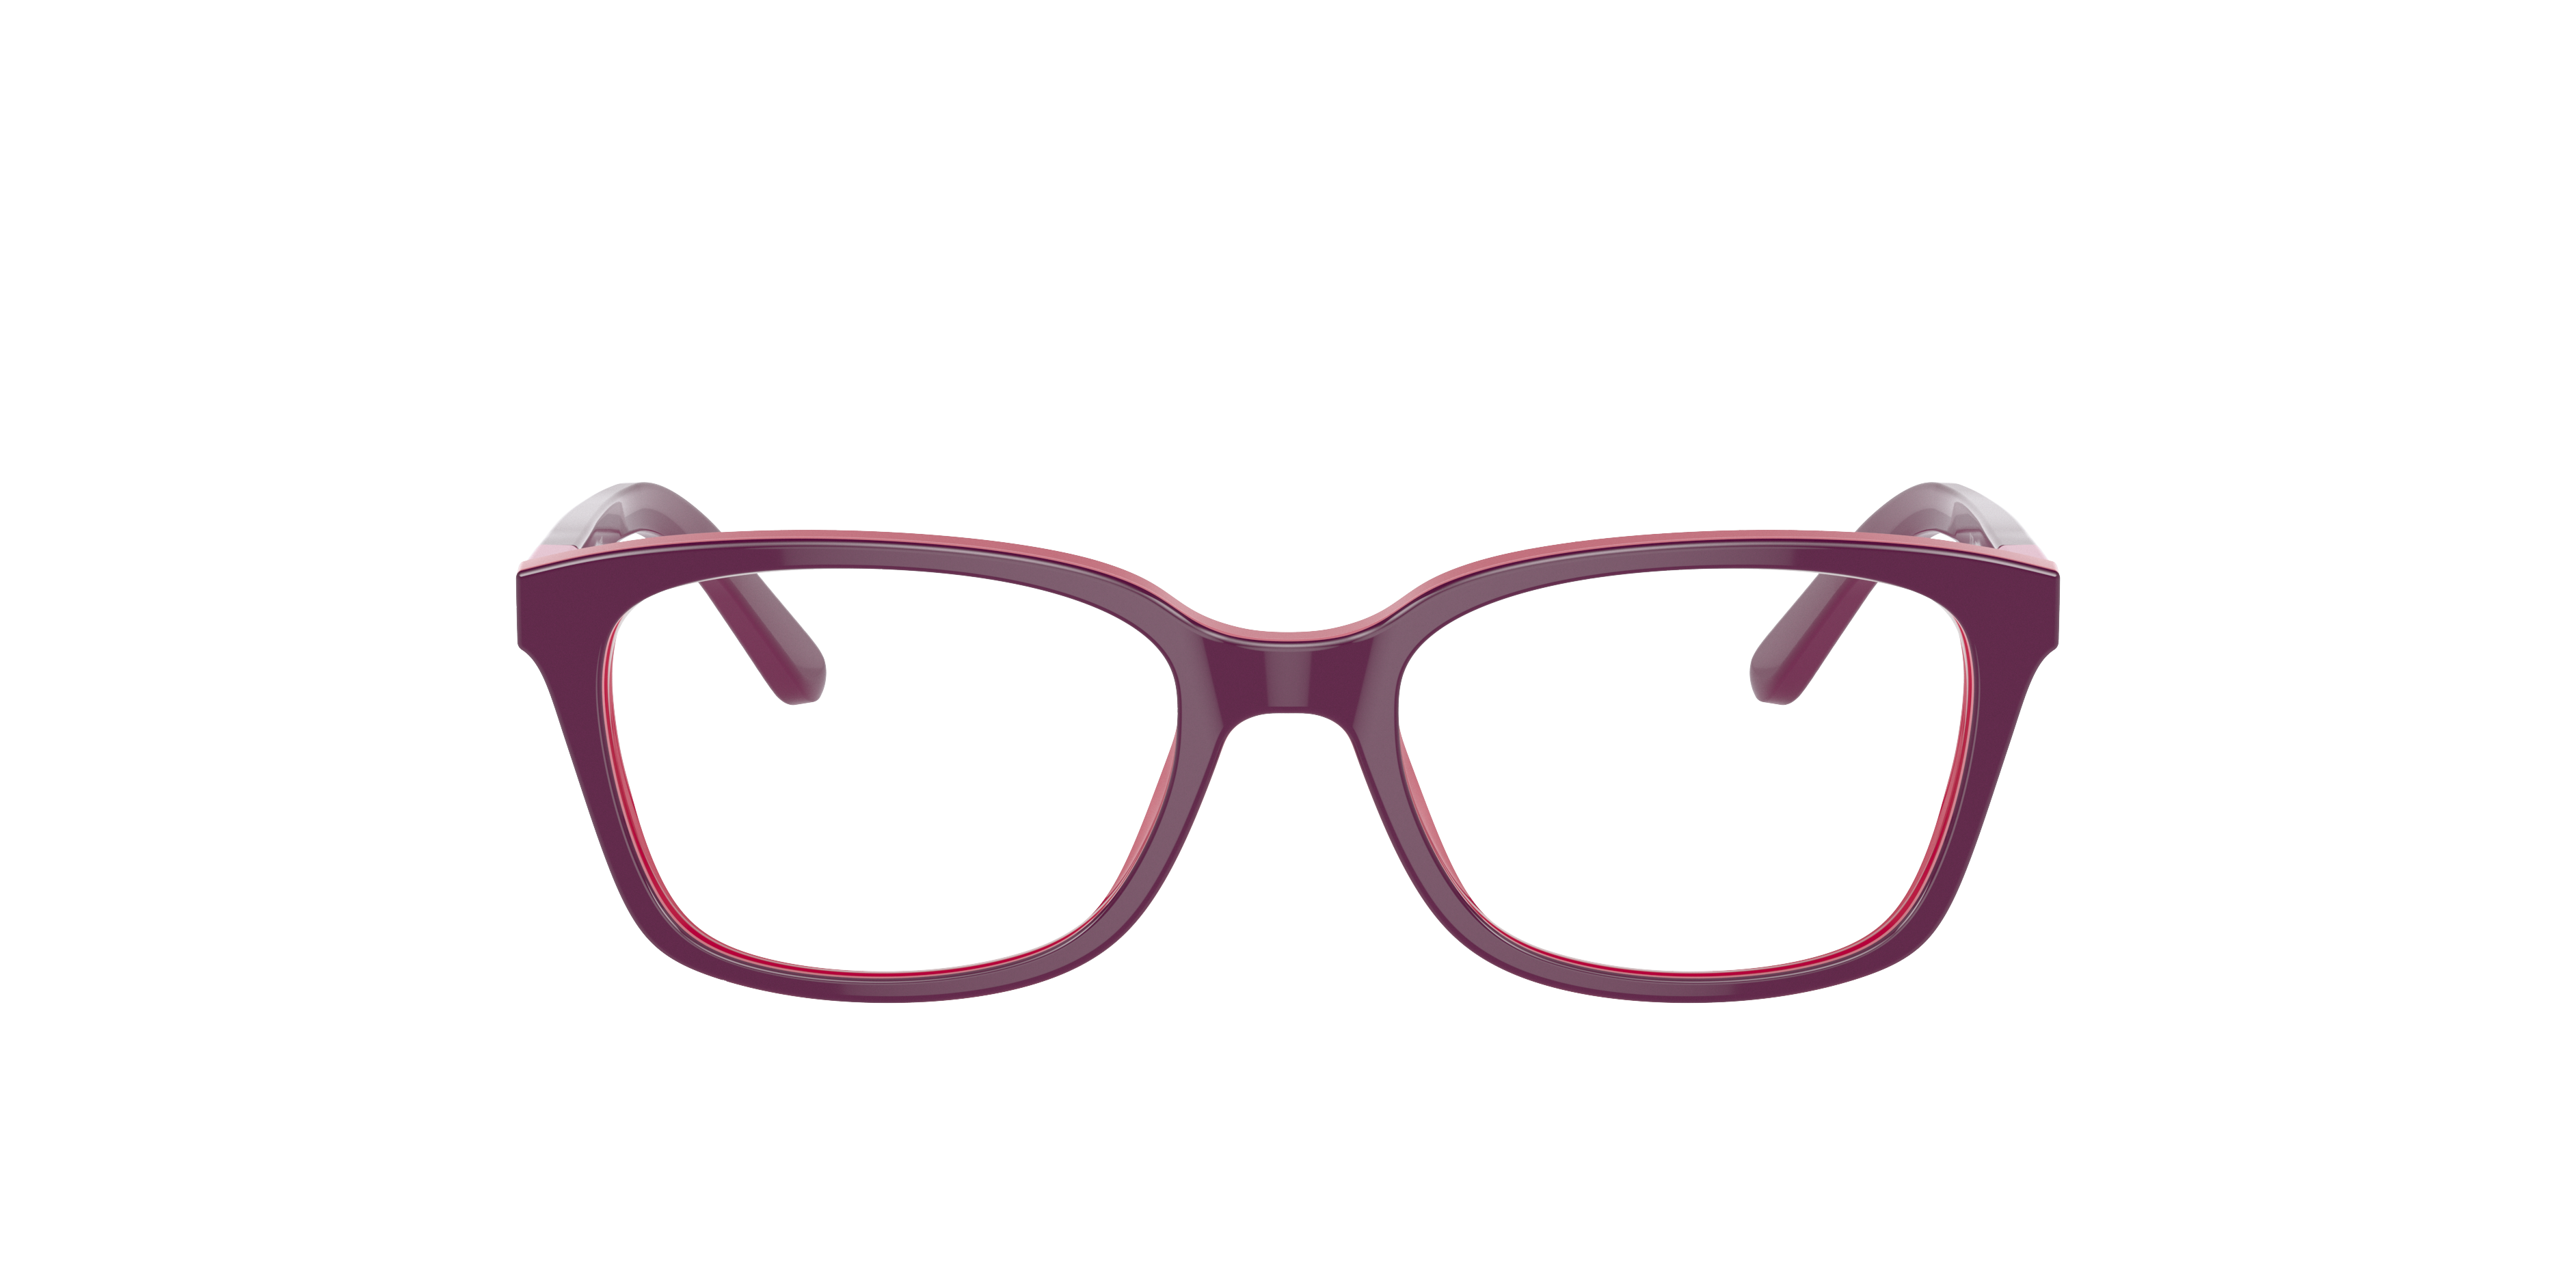  0VY2001__2587 Top Violet/Fuxia Optical